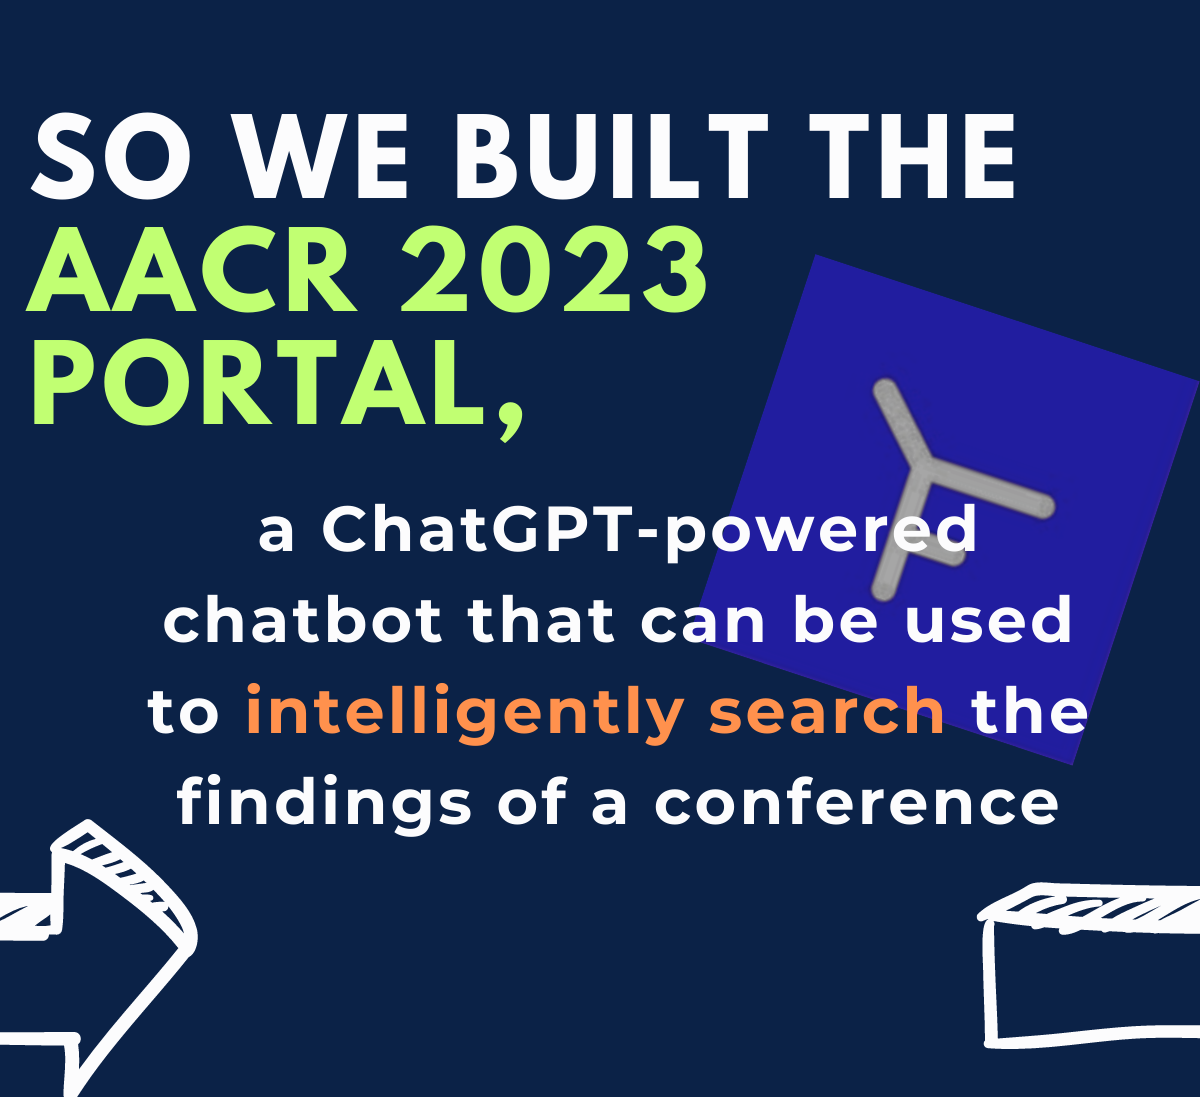 Revolutionizing Medical Conference Coverage: Our ChatGPT-Powered App at AACR 2023